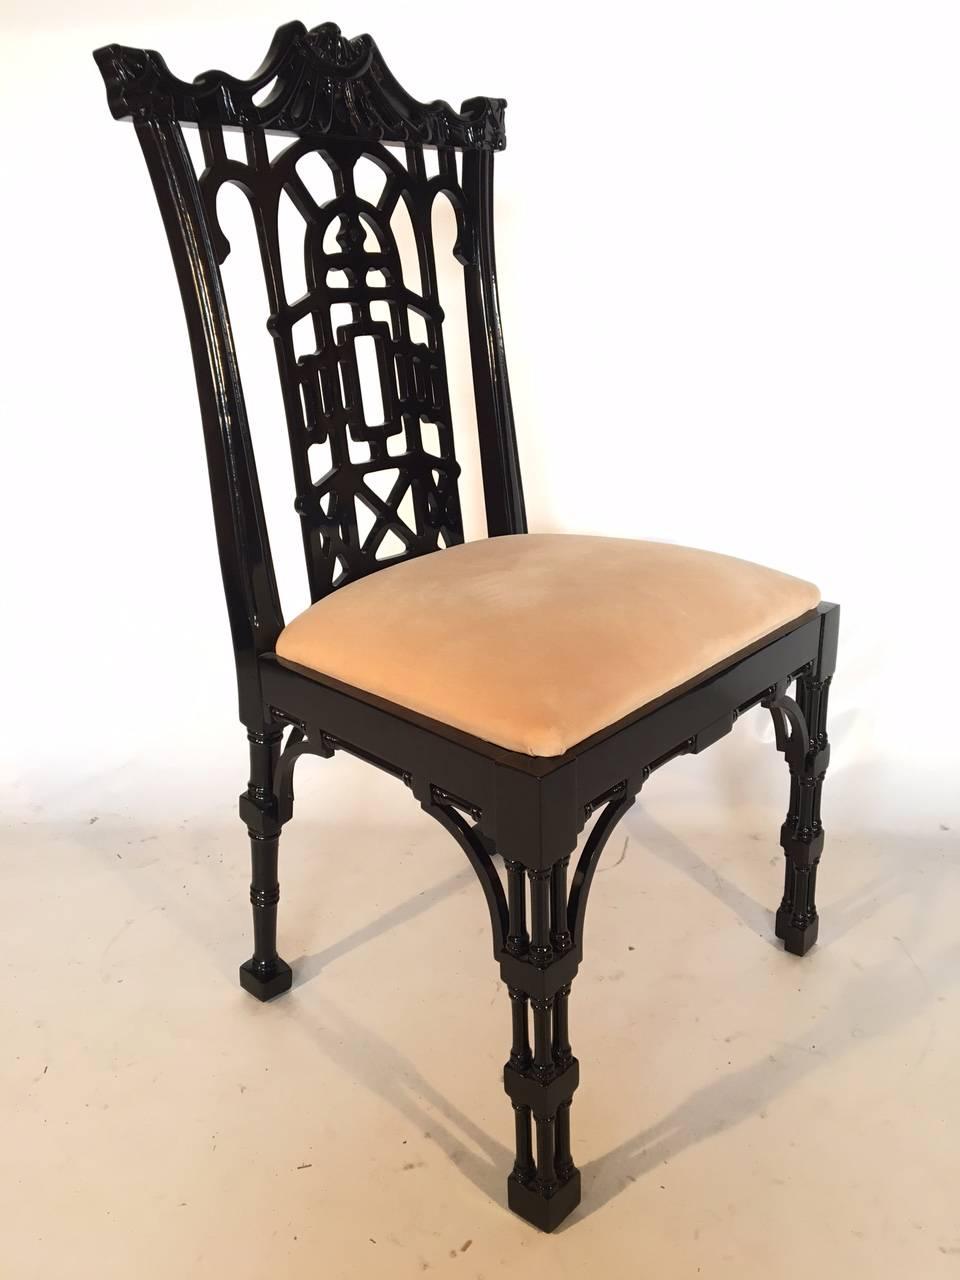 Set of four fabulous Chinese Chinoiserie dining chairs in gloss black. Ornate pagoda style detailing and high gloss finish. Made in Valencia, Spain. Makers tag present.
Excellent vintage condition.
Dimensions: 22.0